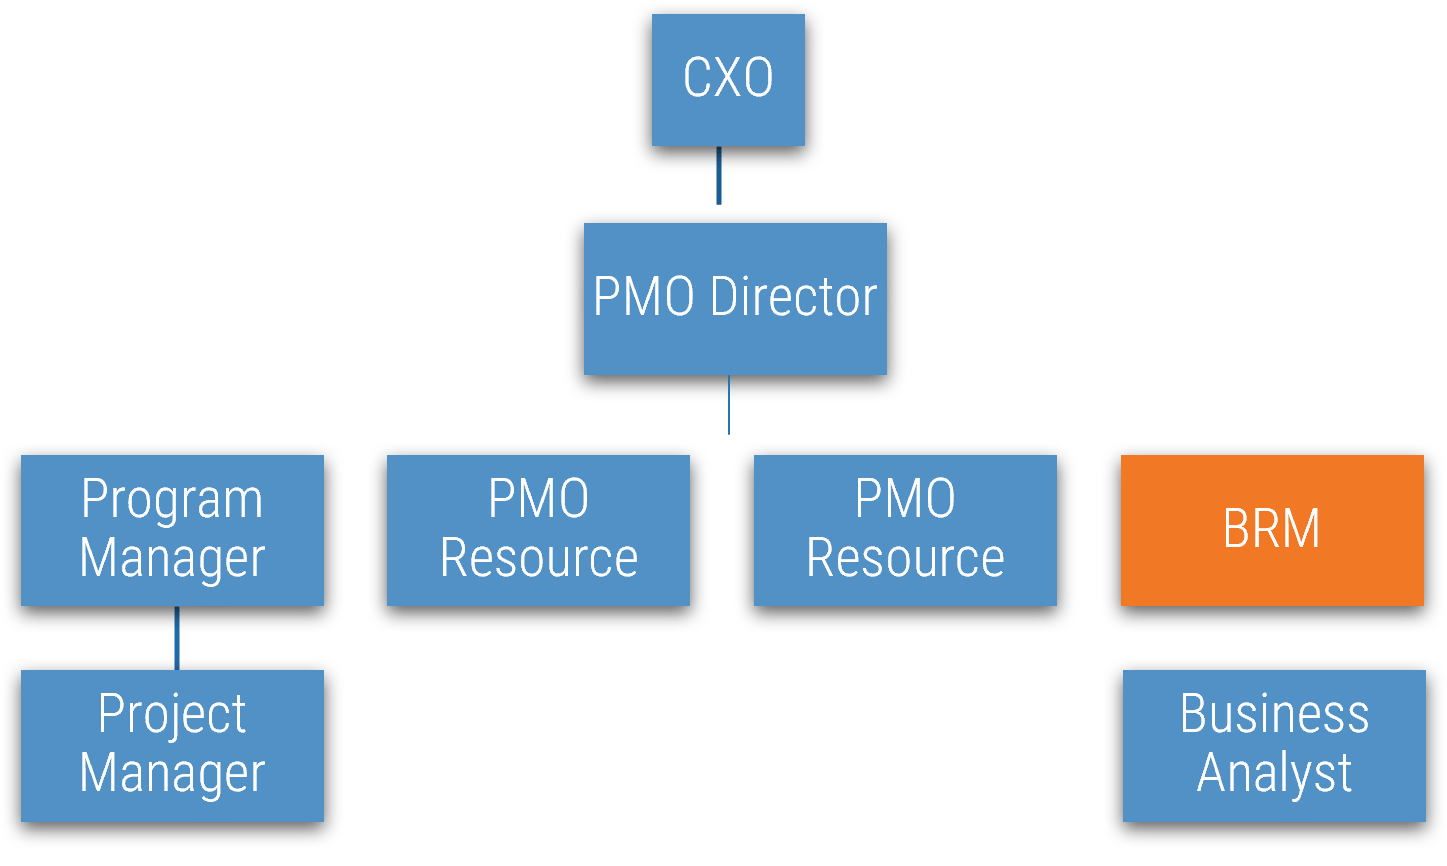 Organization tree with a BRM in a product-aligned organization.